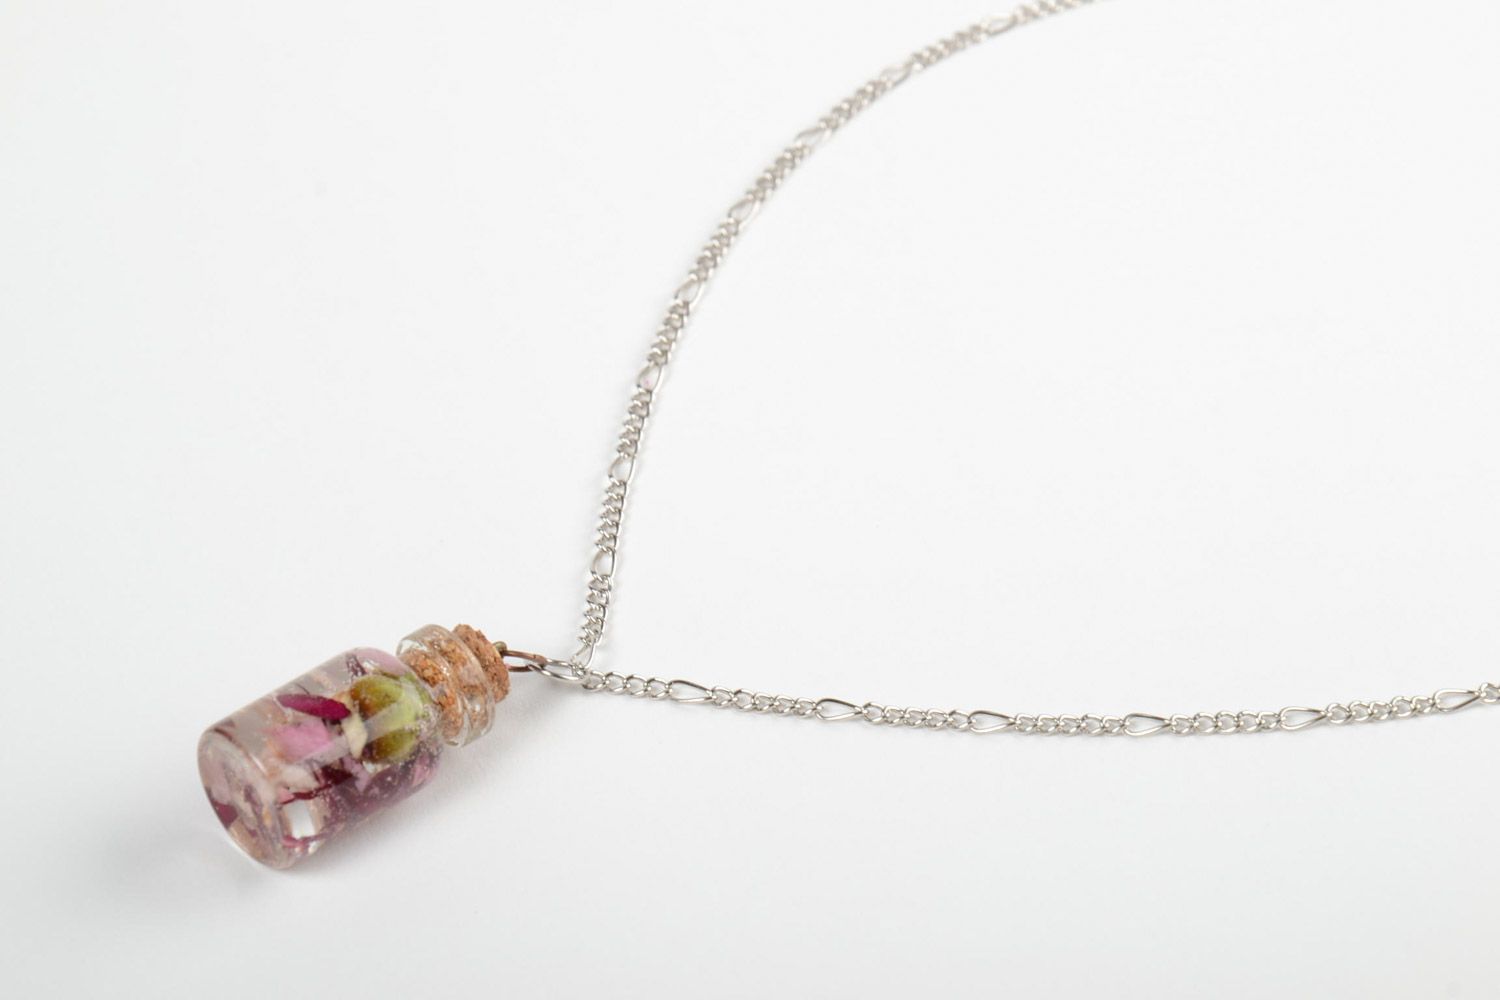 Handmade transparent neck pendant with real flowers inside coated with epoxy photo 3